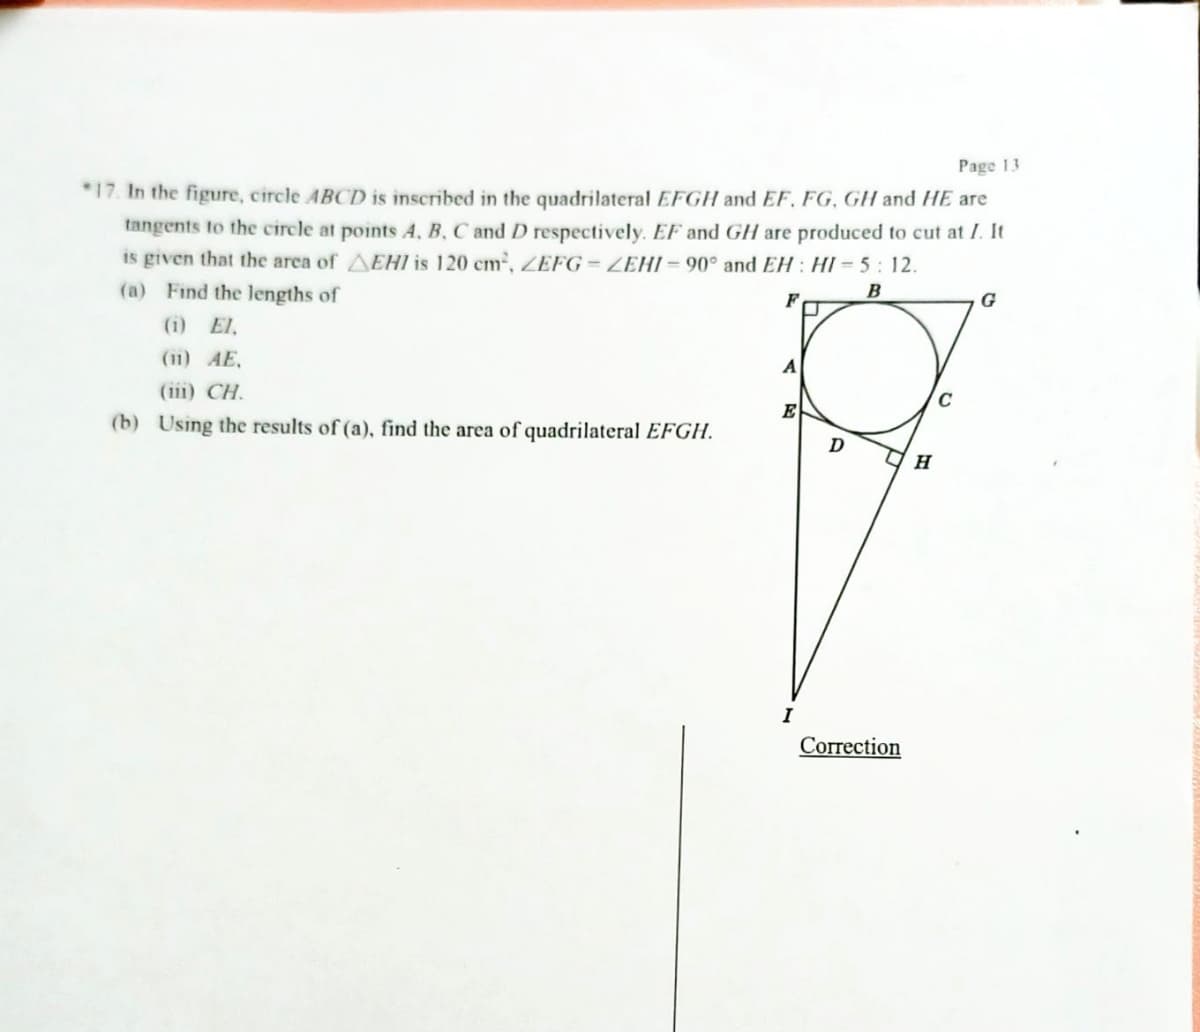 Page 13
*17. In the figure, circle ABCD is inscribed in the quadrilateral EFGH and EF. FG, GH and HE are
tangents to the circle at points A, B, C and D respectively. EF and GH are produced to cut at I. It
is given that the area of EHI is 120 cm², ZEFG-ZEHI-90° and EH: HI= 5:12.
(a) Find the lengths of
B
F
G
(1) El.
(11) AE.
(1) CH.
E
(b) Using the results of (a), find the area of quadrilateral EFGH.
D
Correction
H